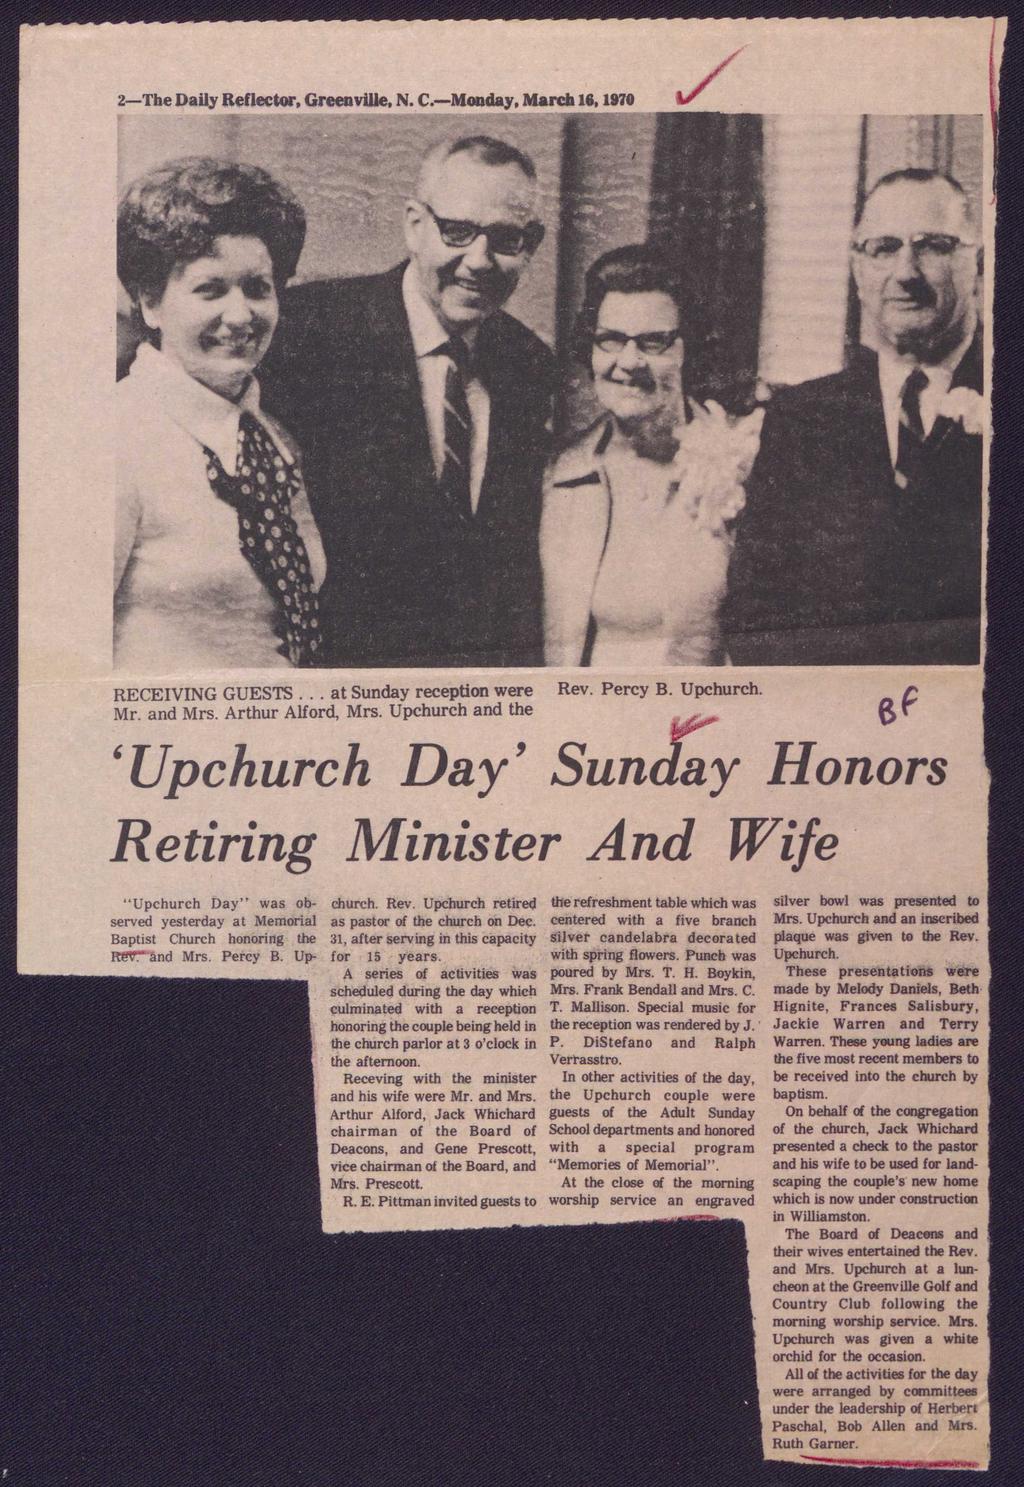 RECEIVING GUESTS... at Sunday reception were Mr. and Mrs. Arthur Alford, Mrs. Upchurch 